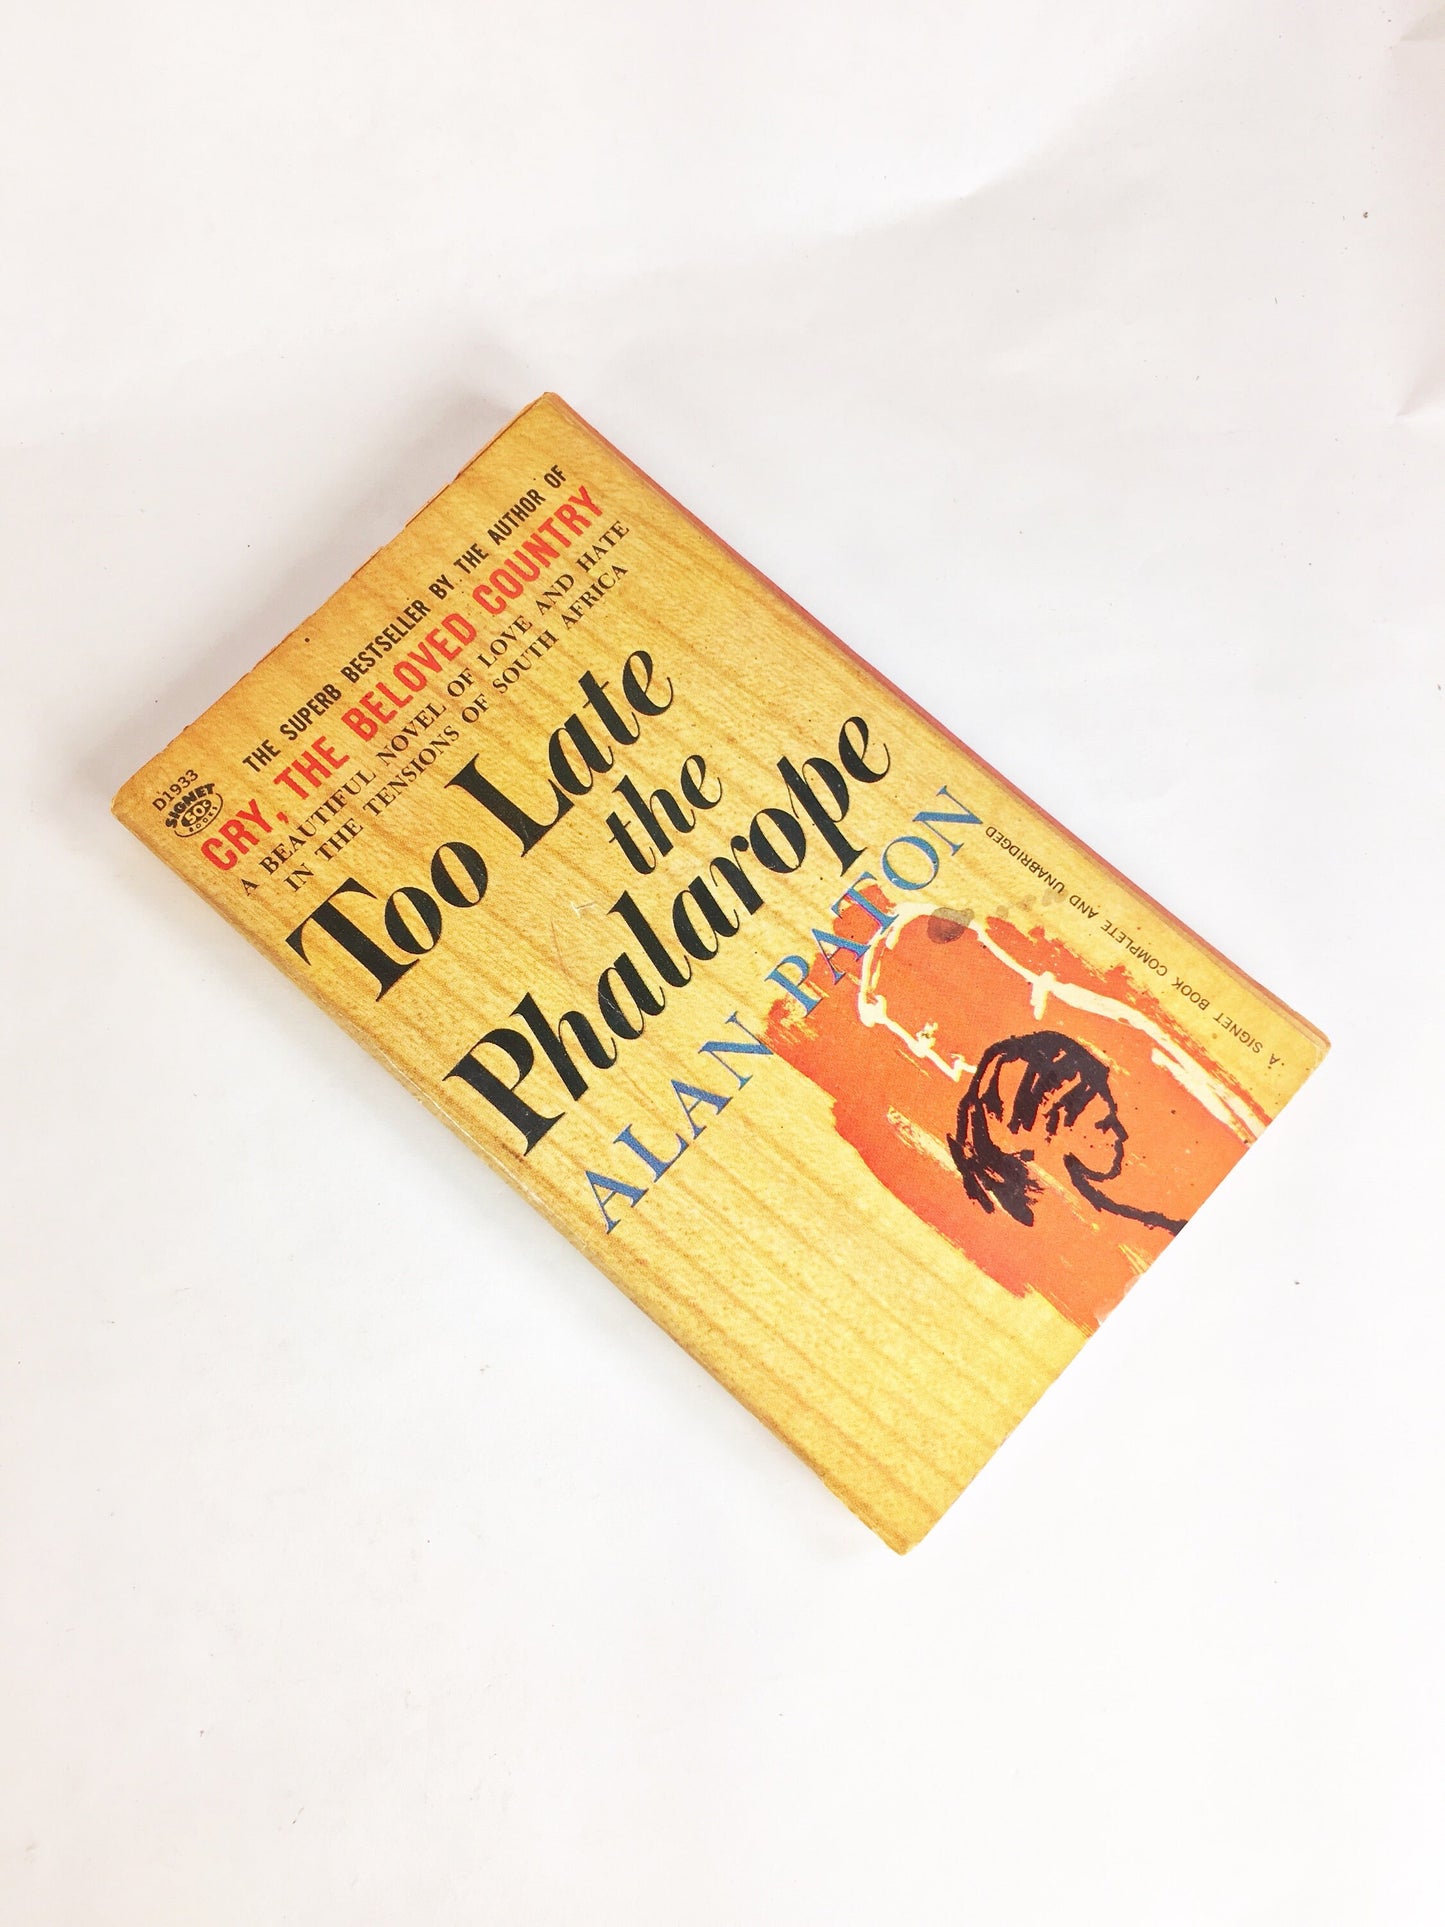 Too Late the Phalarope by Alan Paton, author of Cry the Beloved Country. Vintage paperback book circa 1961 Police conscience in South Africa